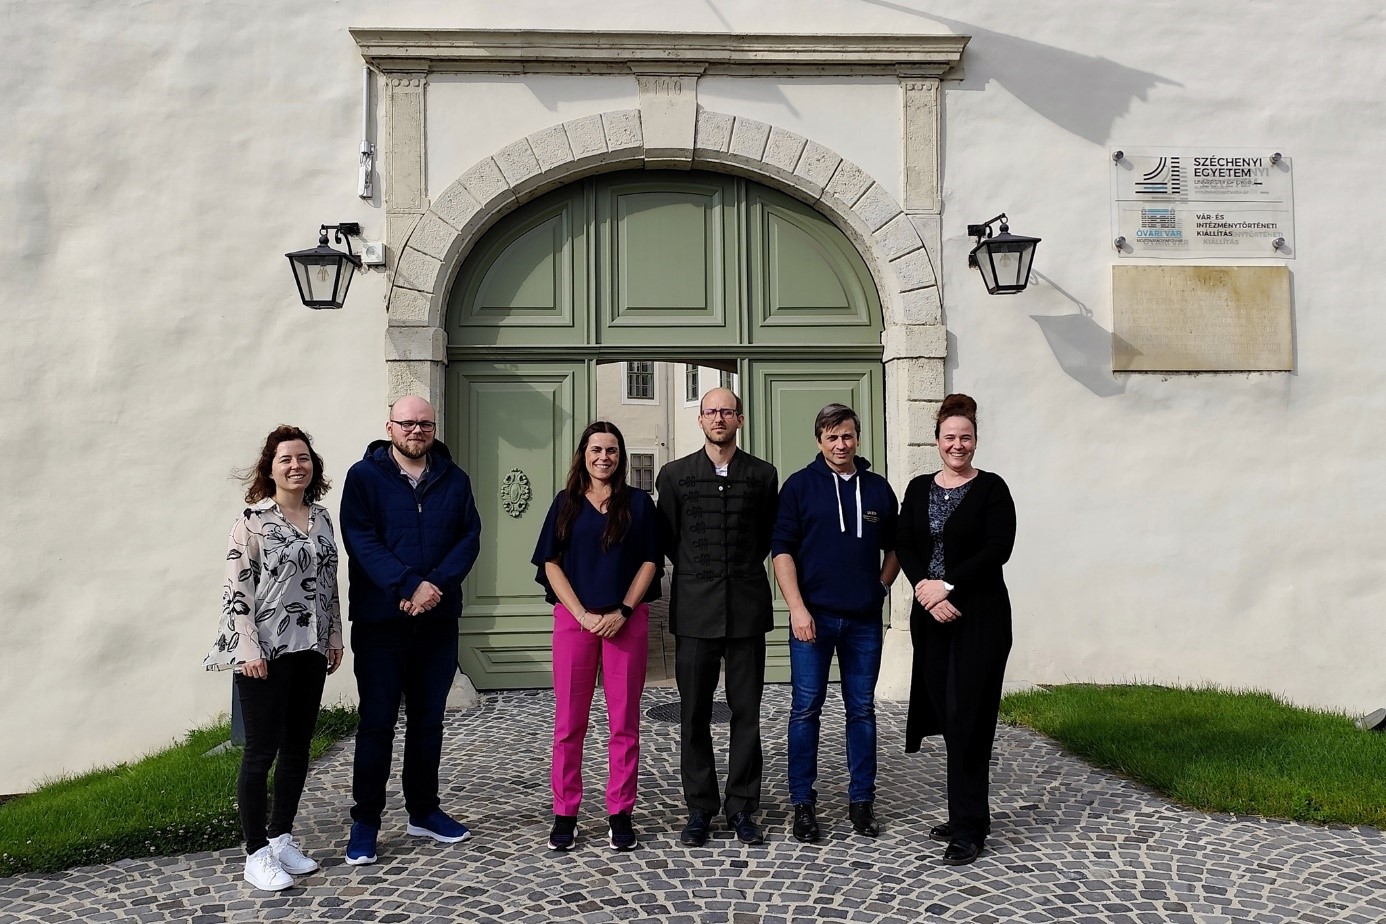 The guests visited the castle of the Albert Kázmér Mosonmagyaróvár Faculty of the Széchenyi István University in Ódvar, and got acquainted with the social institutions in the town, such as the Family and Child Welfare Centre, shown in the second picture.